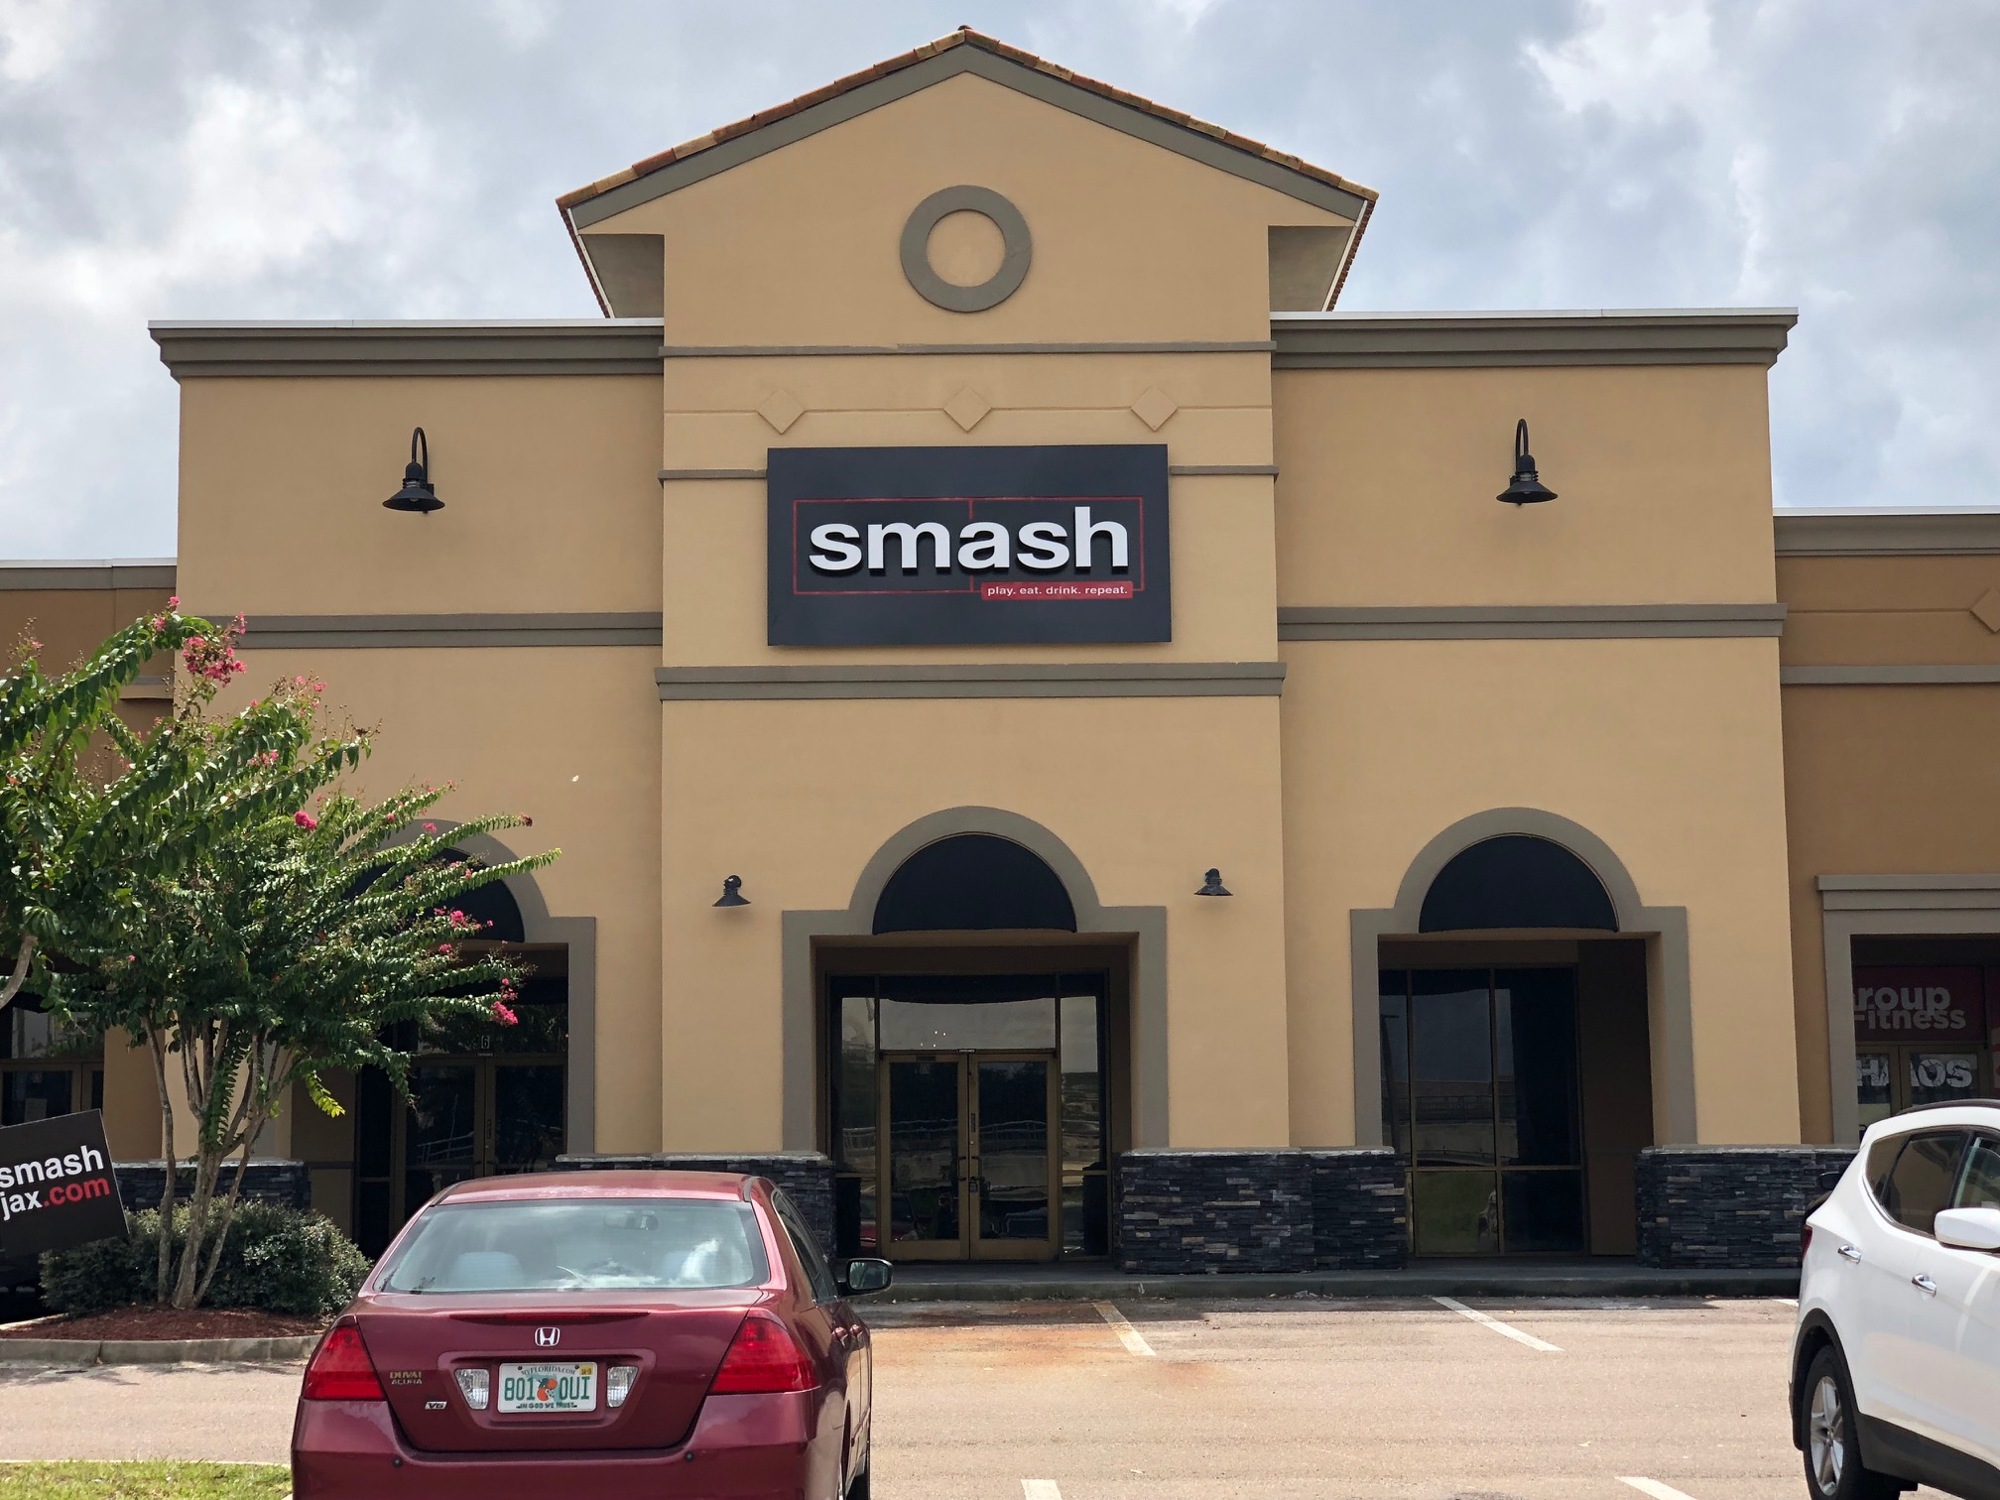 Smash is coming to Baymeadows Junction at 8206 Philips Highway.